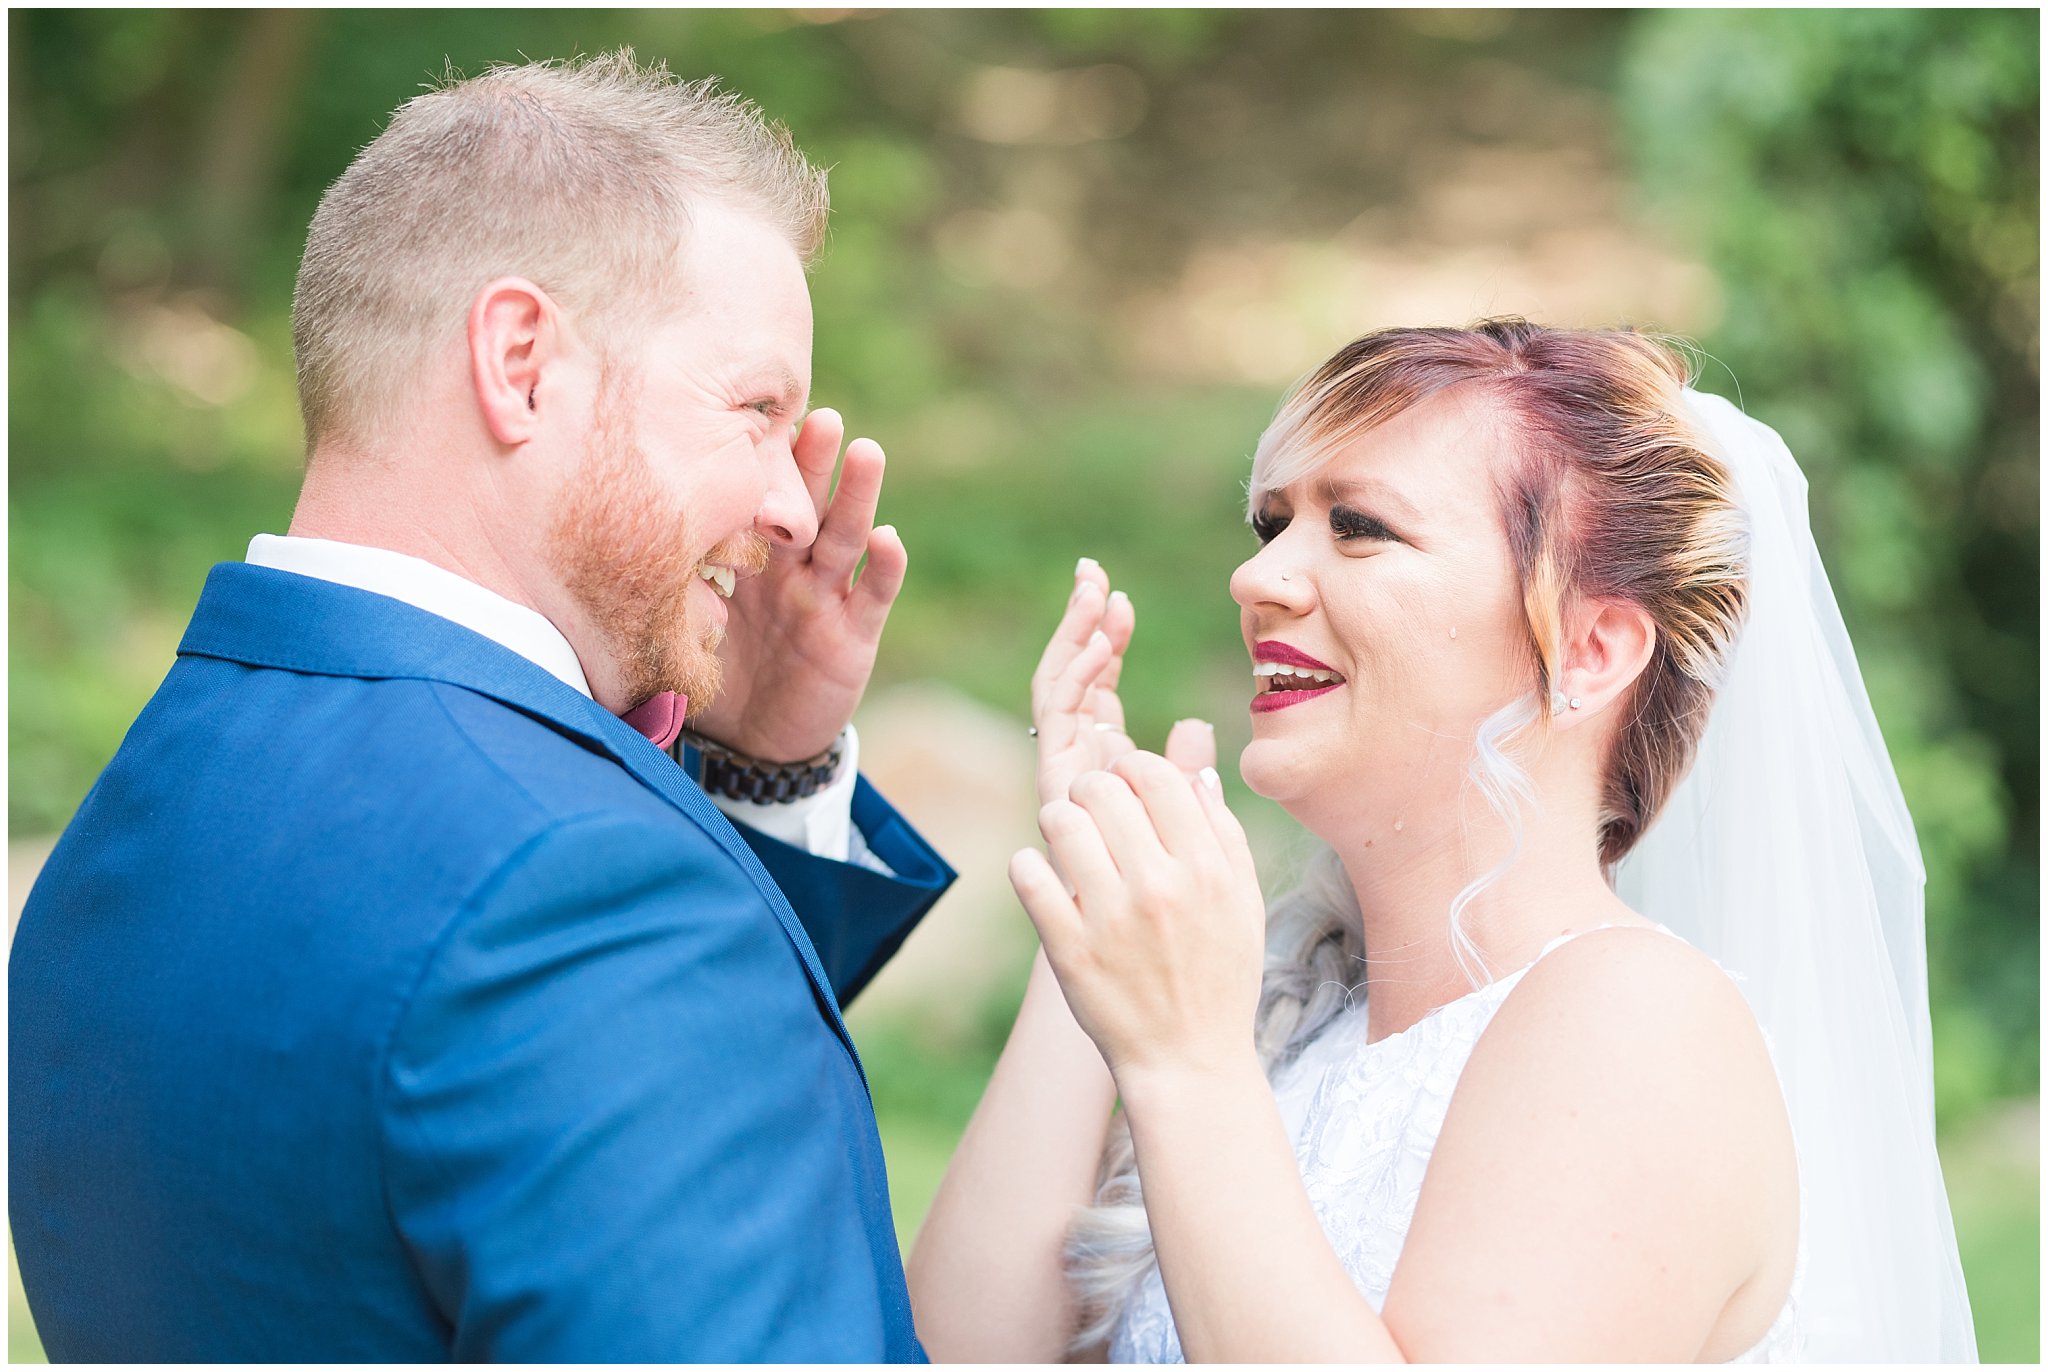 Emotional first look between bride and groom before wedding ceremony | Top Utah Wedding and Couples Photos 2019 | Jessie and Dallin Photography